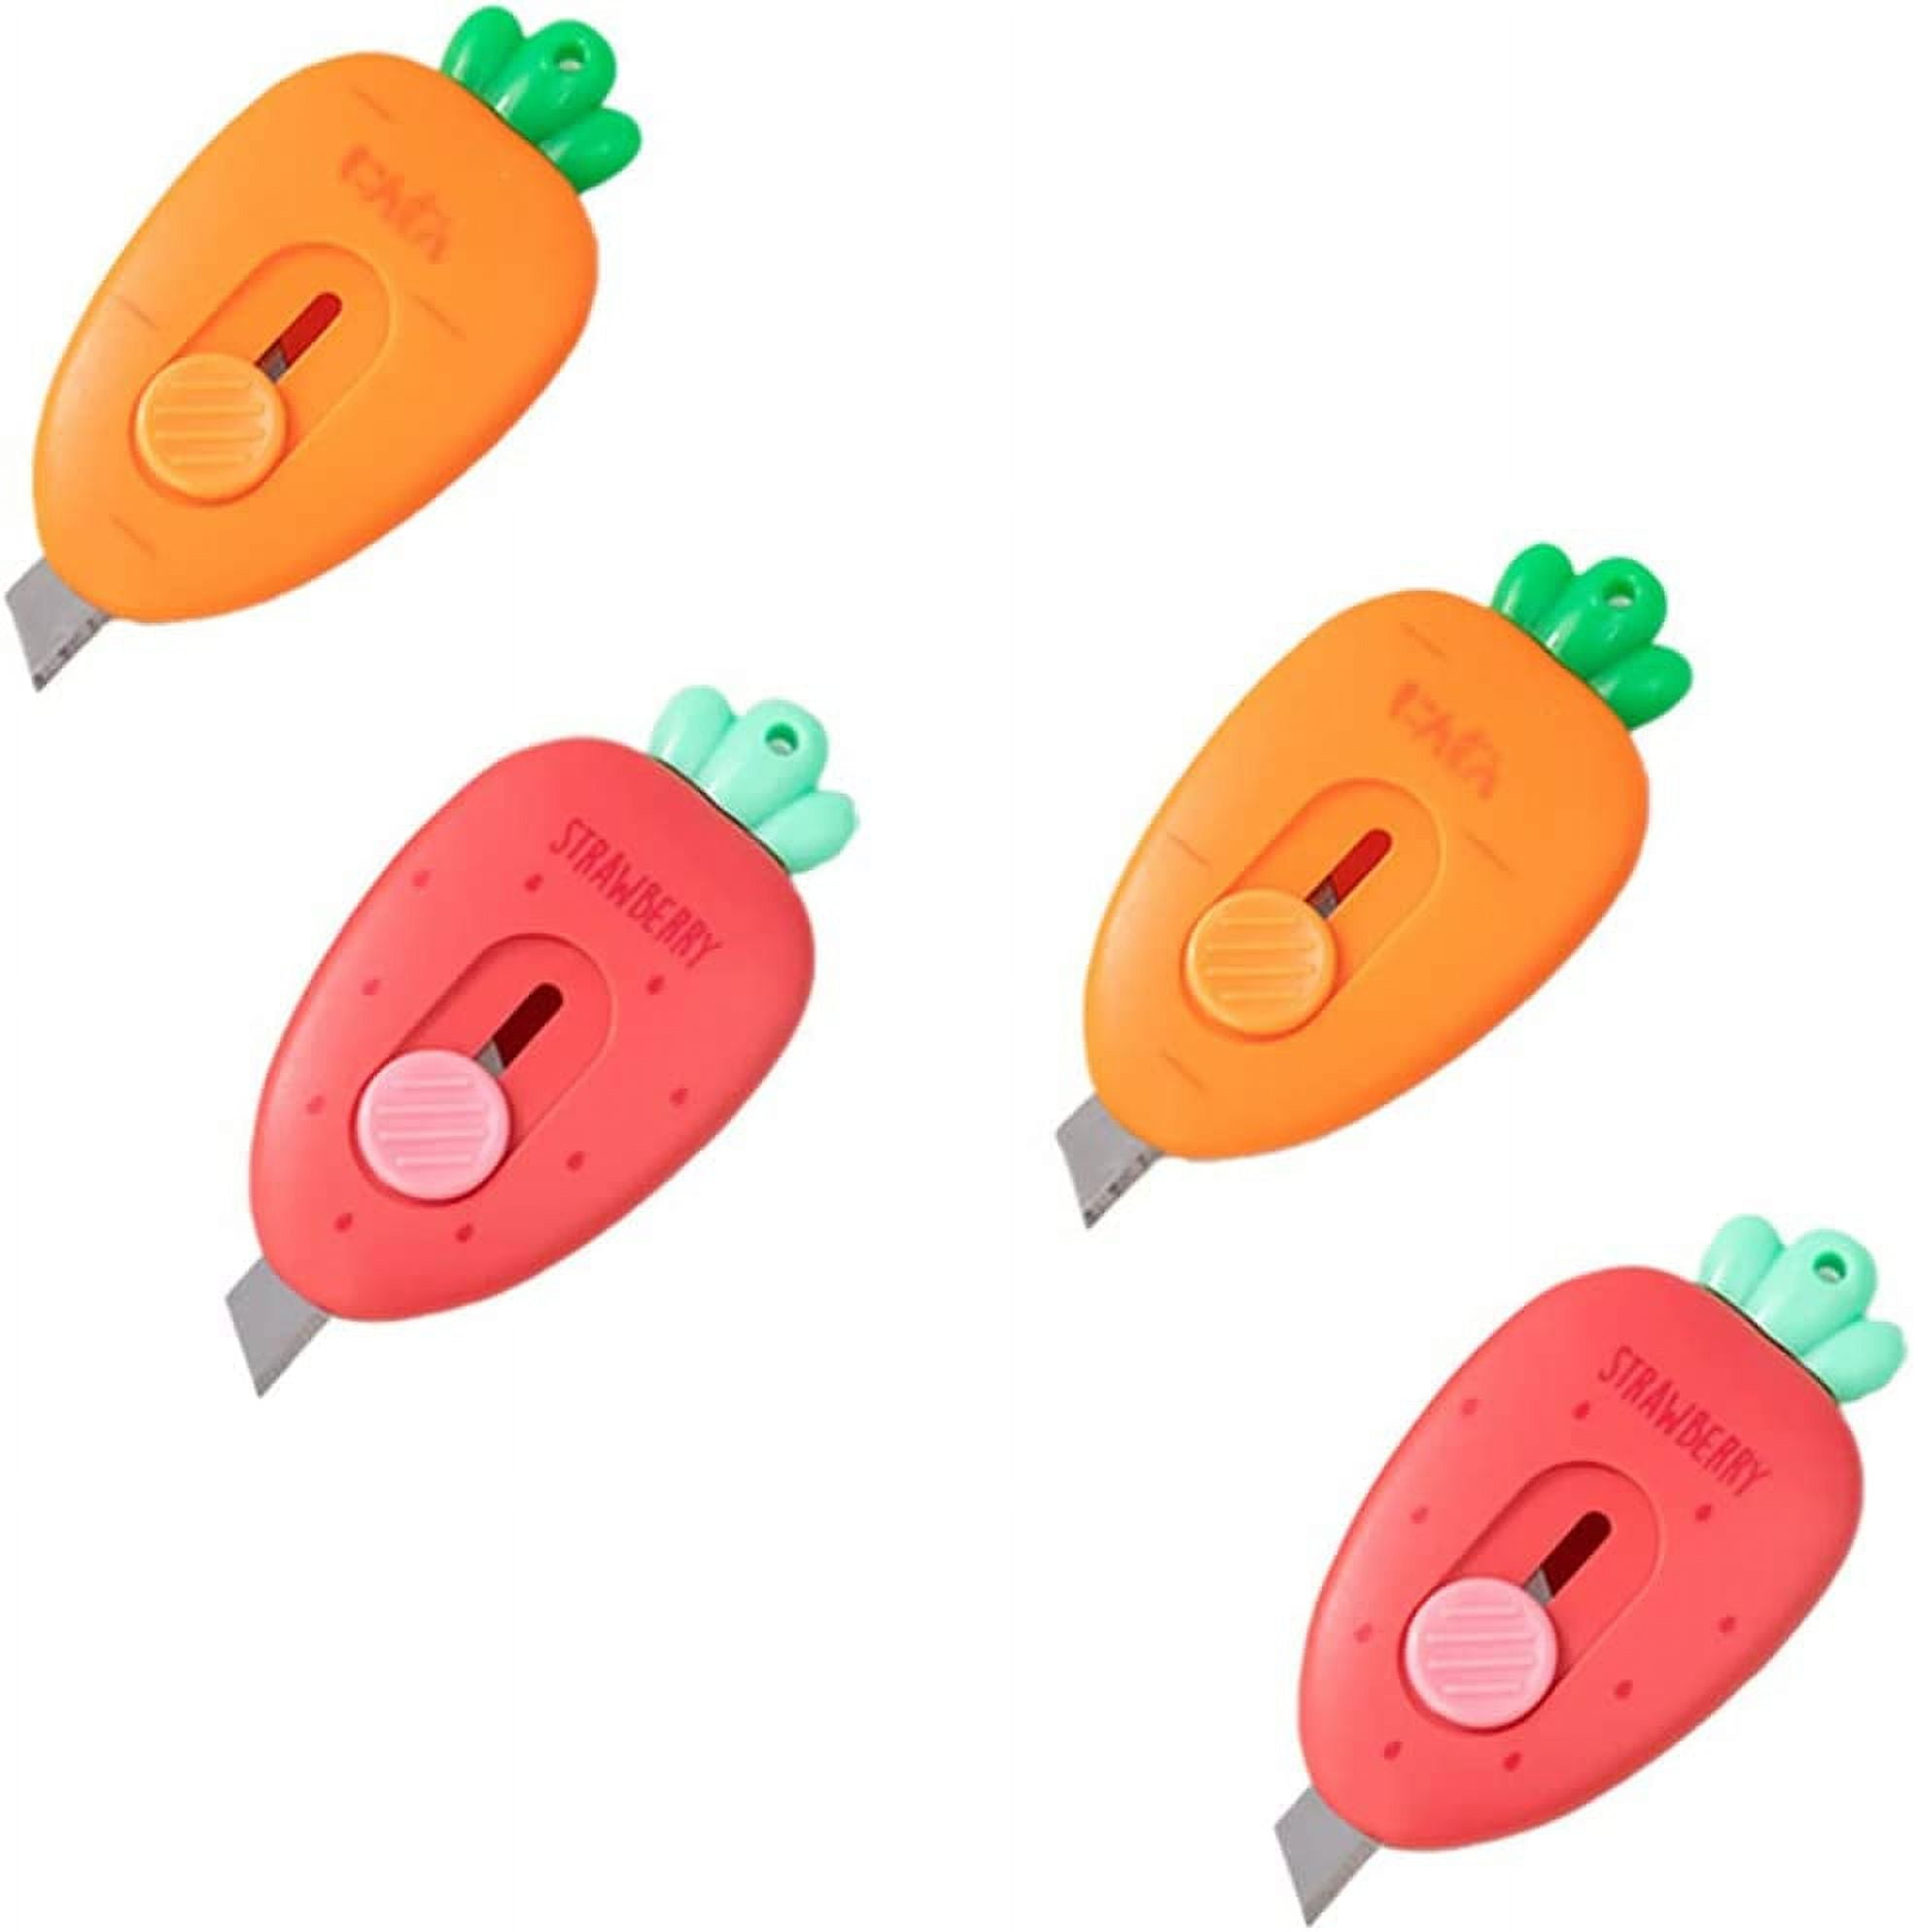 6 Pcs Small Cute Box Cutter Mini Retractable Utility Knife Scissors Carrot  Strawberry Shaped Letter Opener Lock Slides Knife Stationery Supplies for